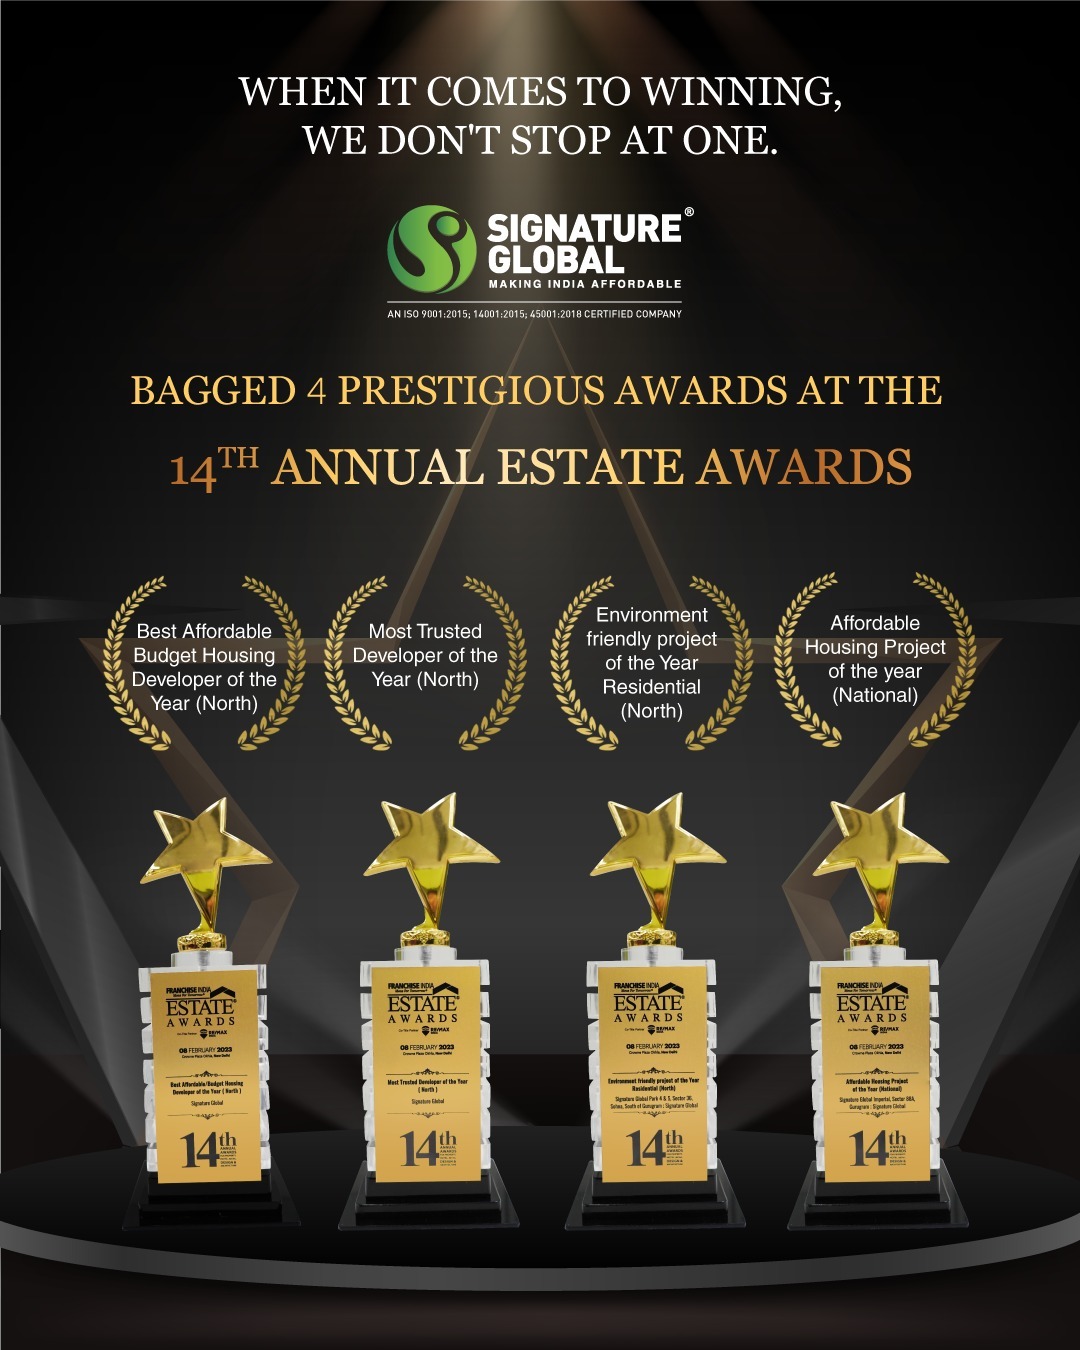 It is a moment of great joy for us to announce that Signature Global won 4 prestigious awards at the 14th Annual Estate Awards.